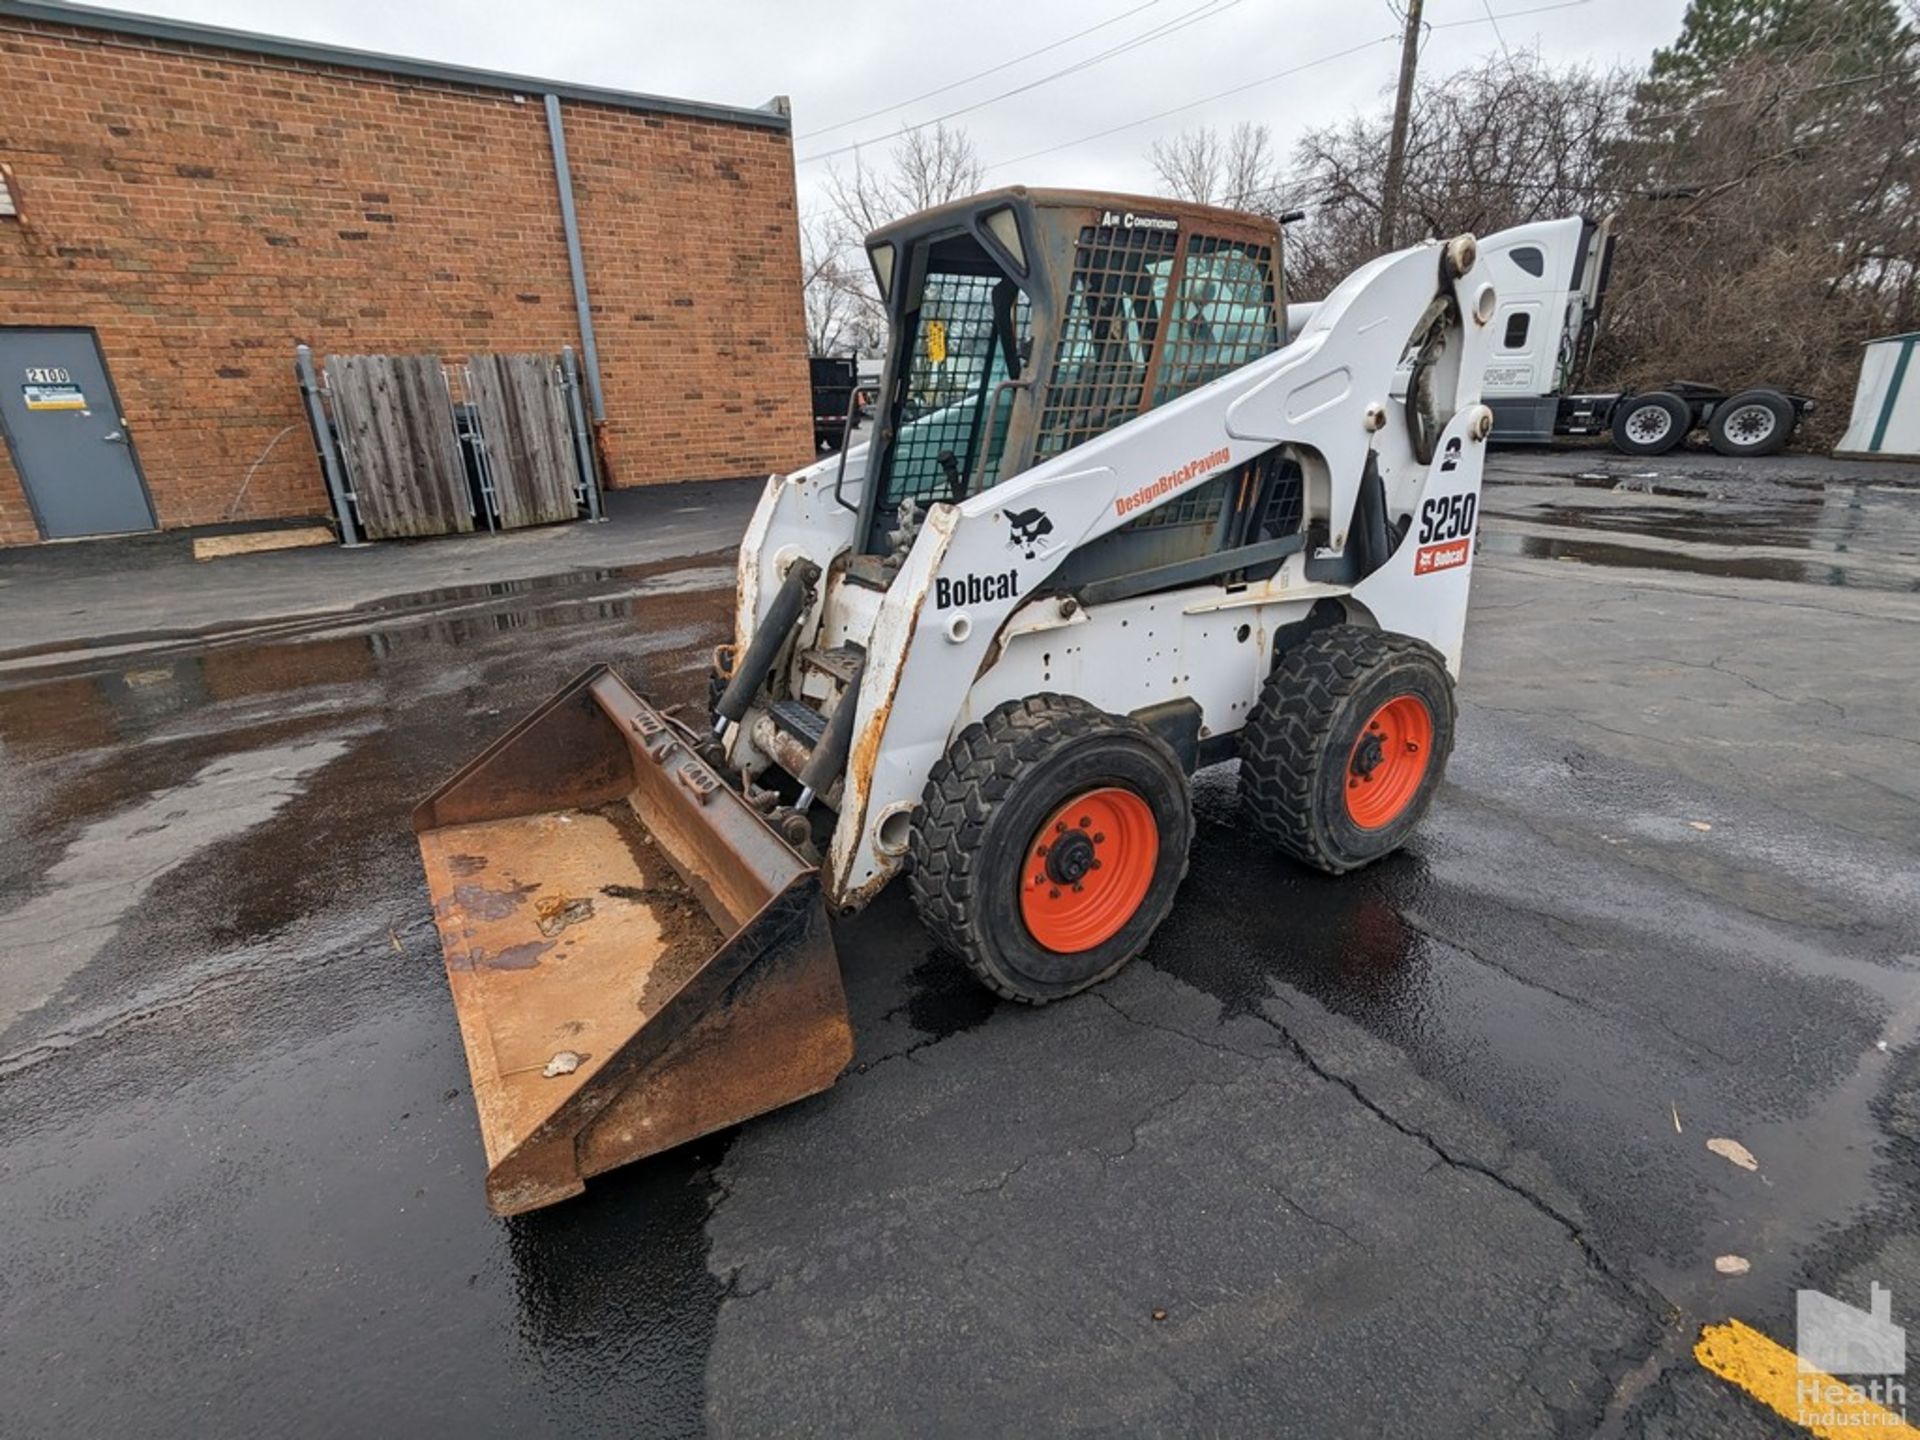 BOBCAT MODEL S250 SKID STEER LOADER, PIN 521316469, AUX HYDRAULICS, 2353 HOURS SHOWN ON METER - Image 3 of 10